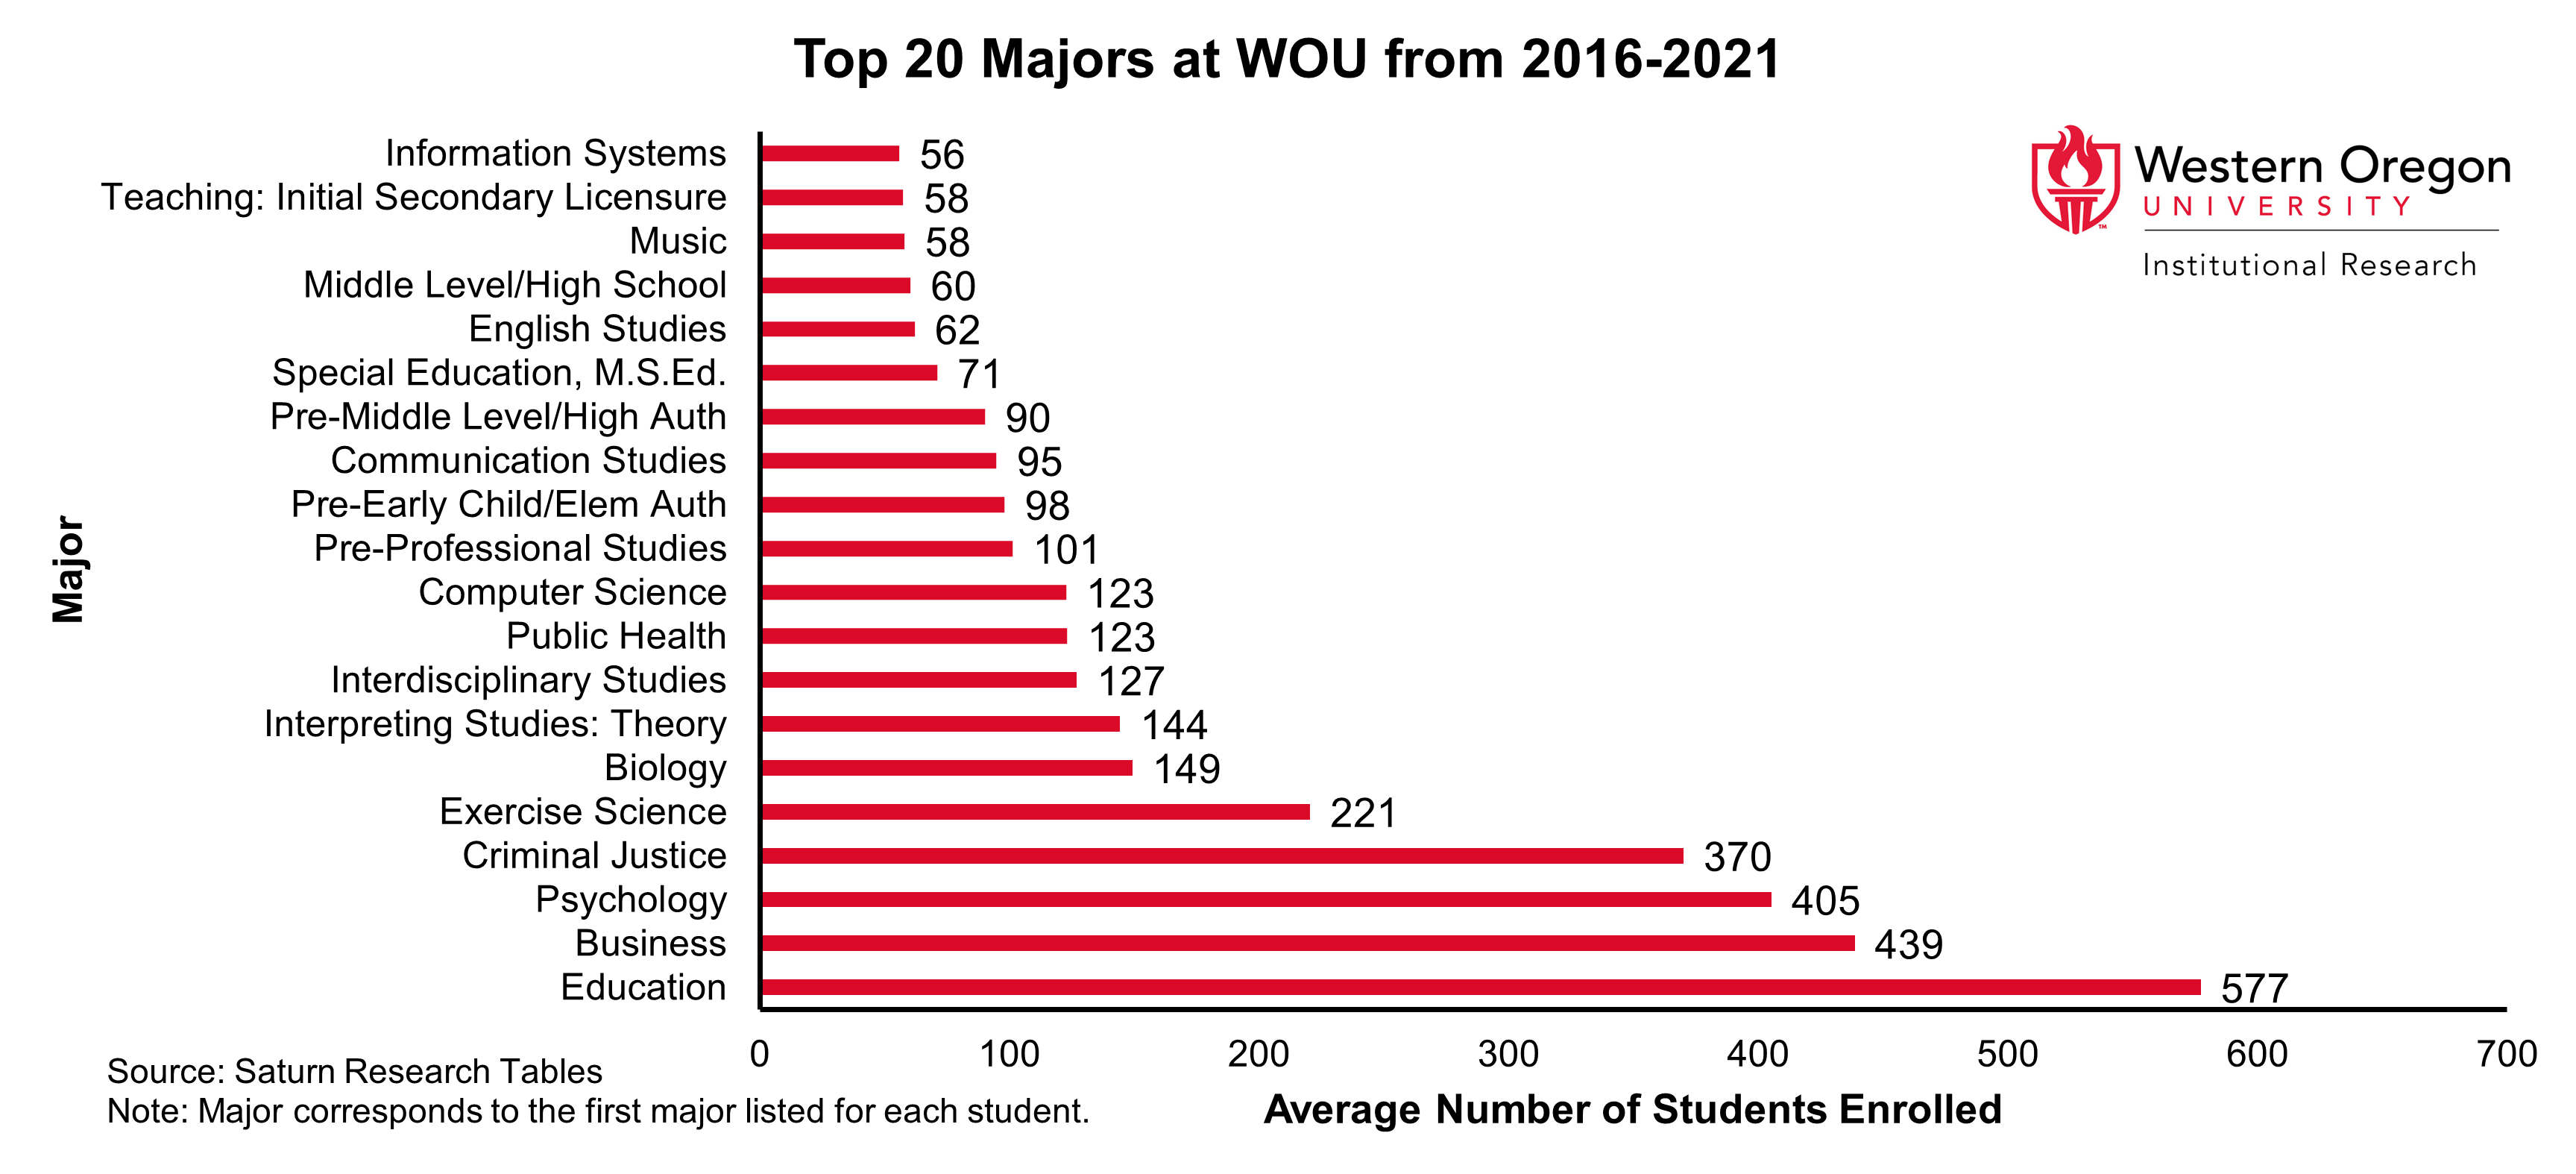 Bar graph of the top 20 majors at WOU between 2016 and 2021, showing that Education, Business, and Psychology are the majors with the largest number of students enrolled